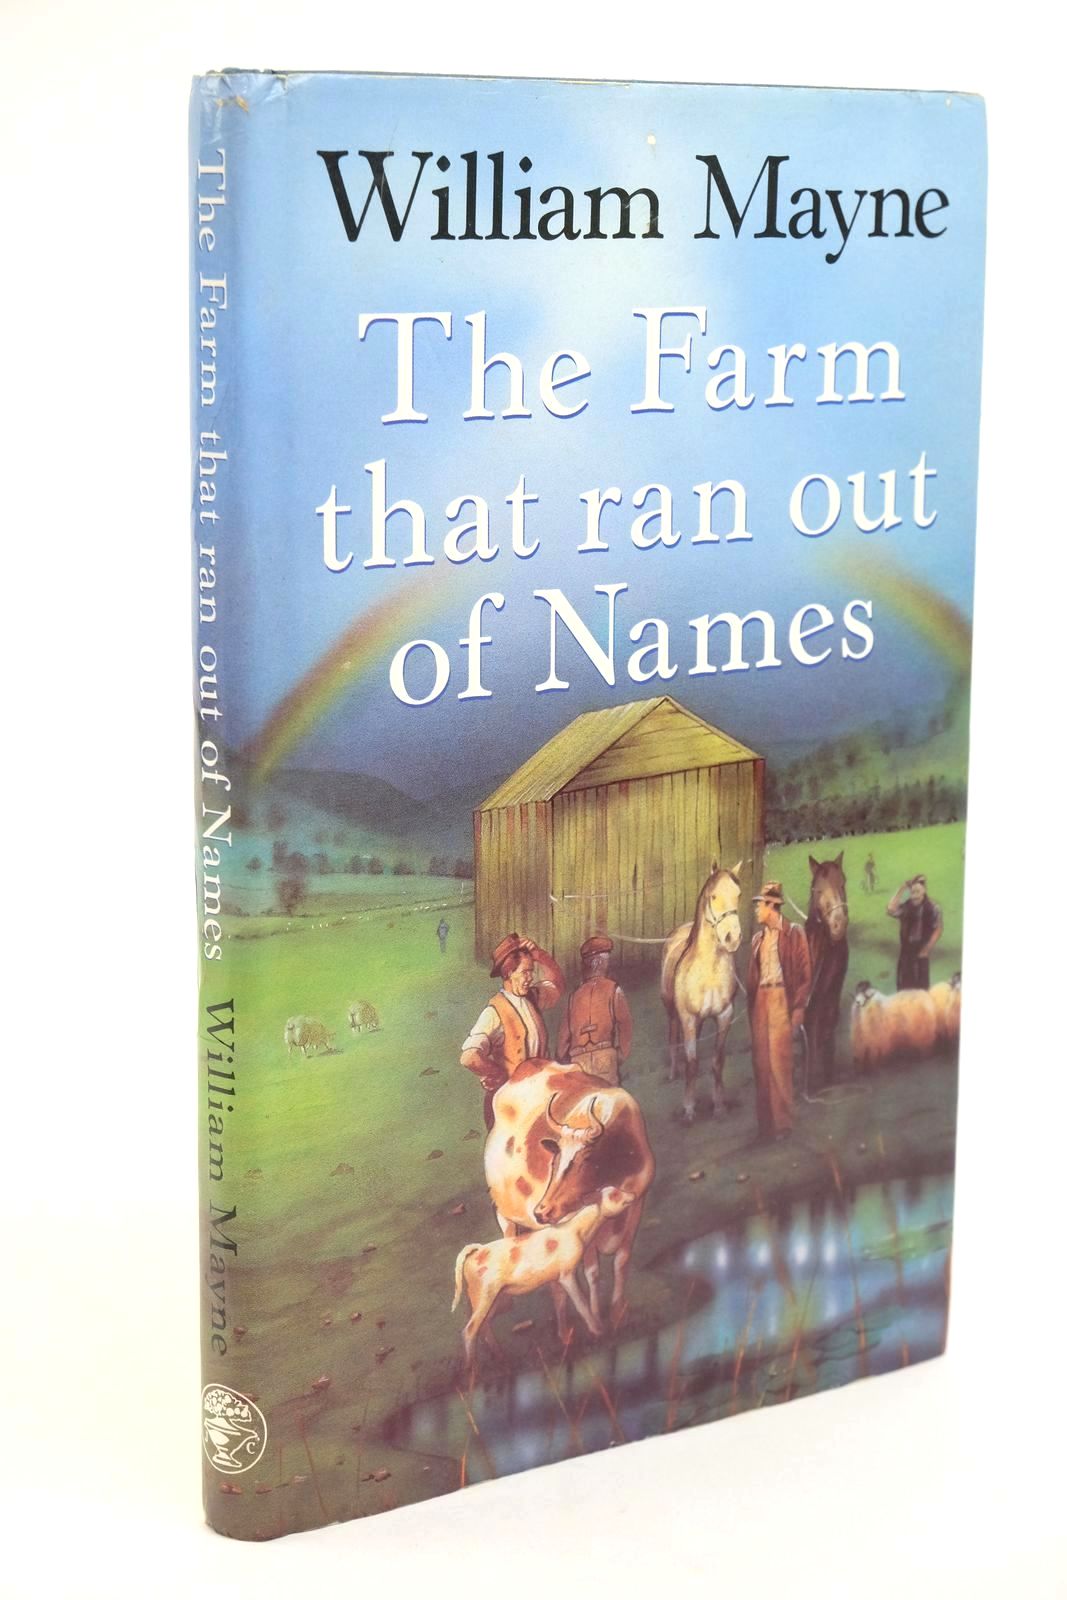 Photo of THE FARM THAT RAN OUT OF NAMES written by Mayne, William published by Jonathan Cape (STOCK CODE: 1323103)  for sale by Stella & Rose's Books